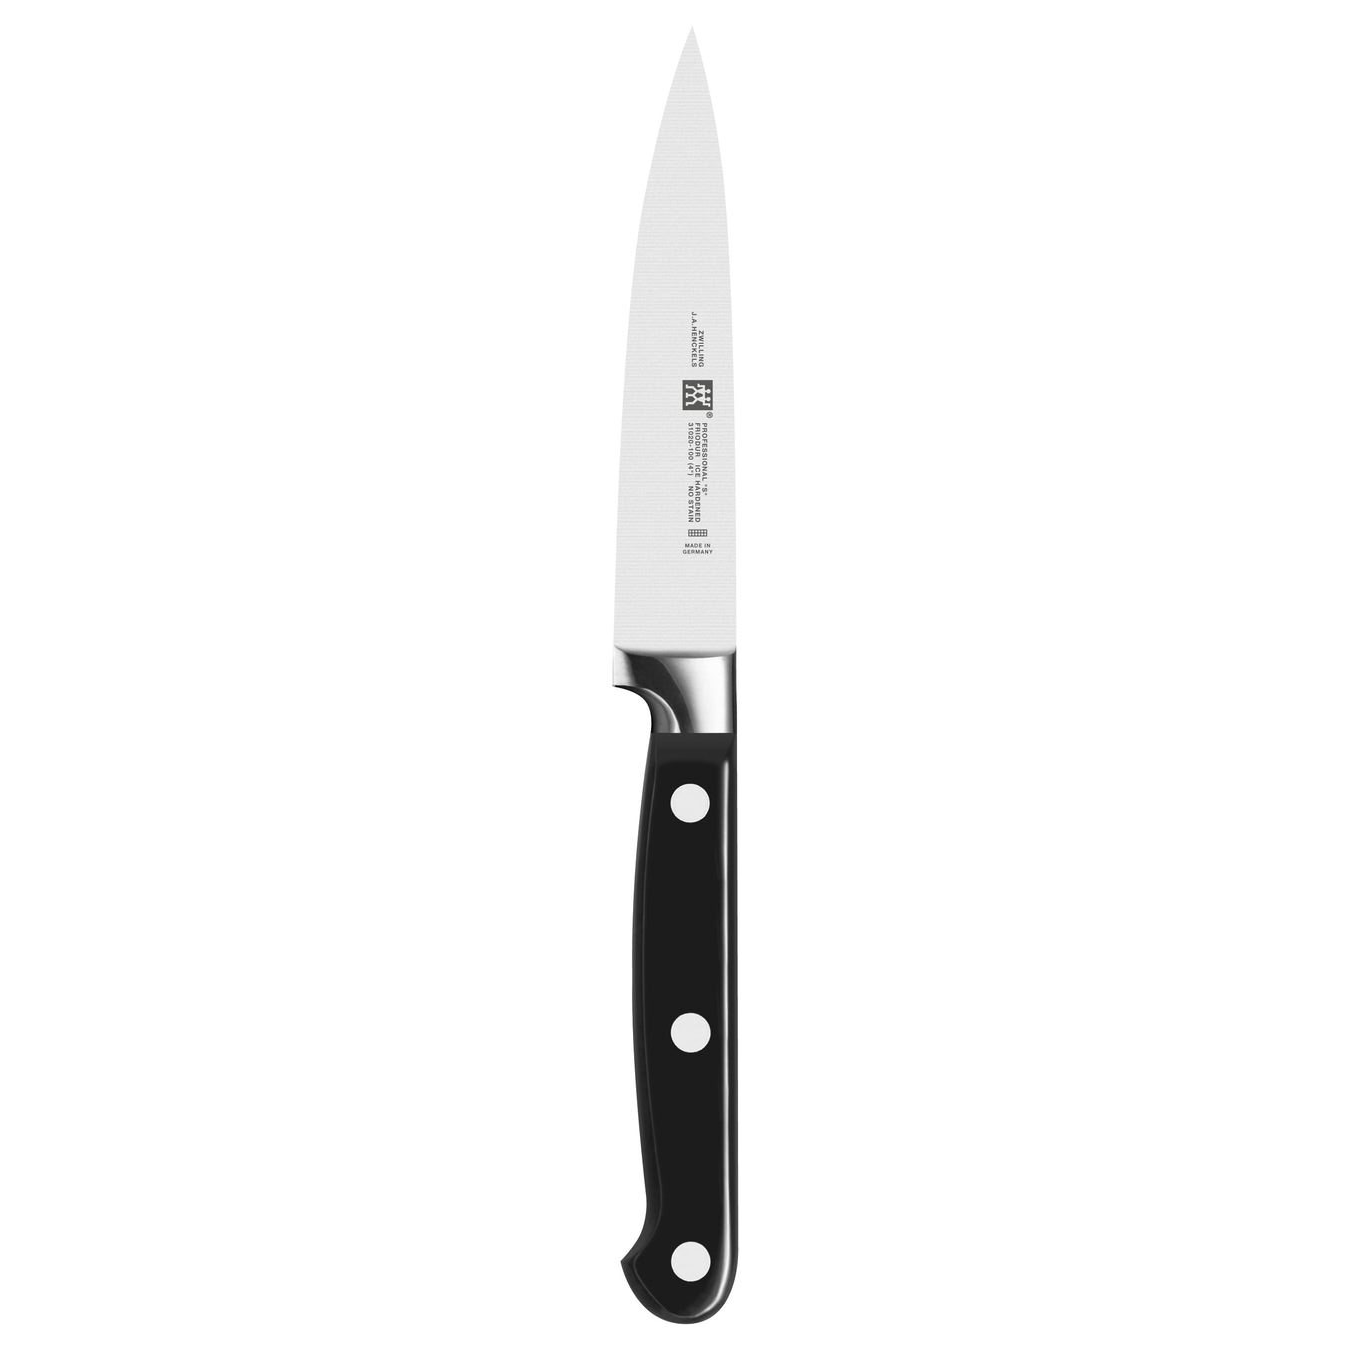 Zwilling Pro-S 4" Paring Knife